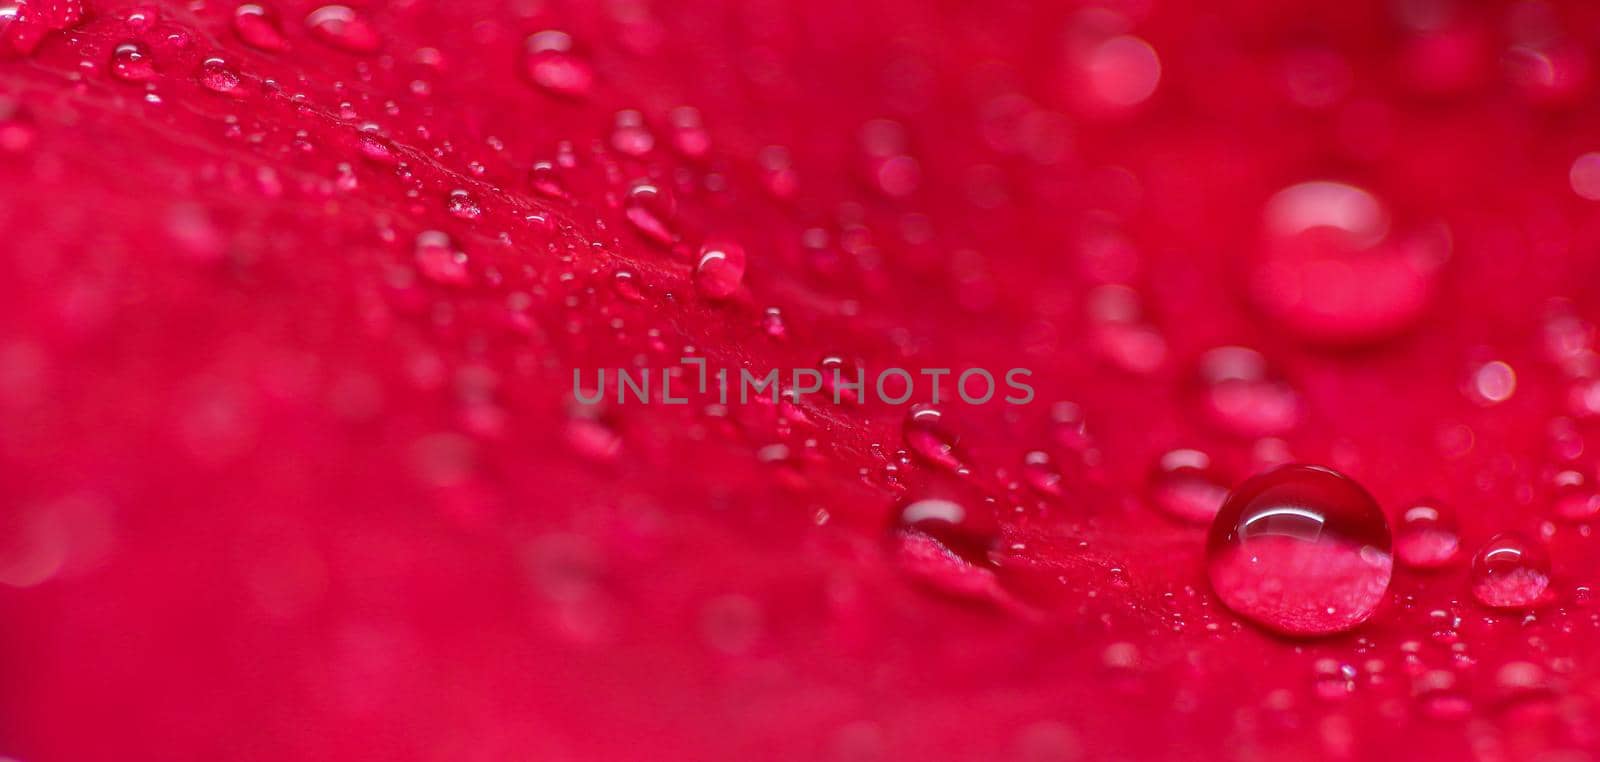 Background of red rose petals with dew drops. Bokeh with light reflection. Macro blurred natural backdrop by Olayola